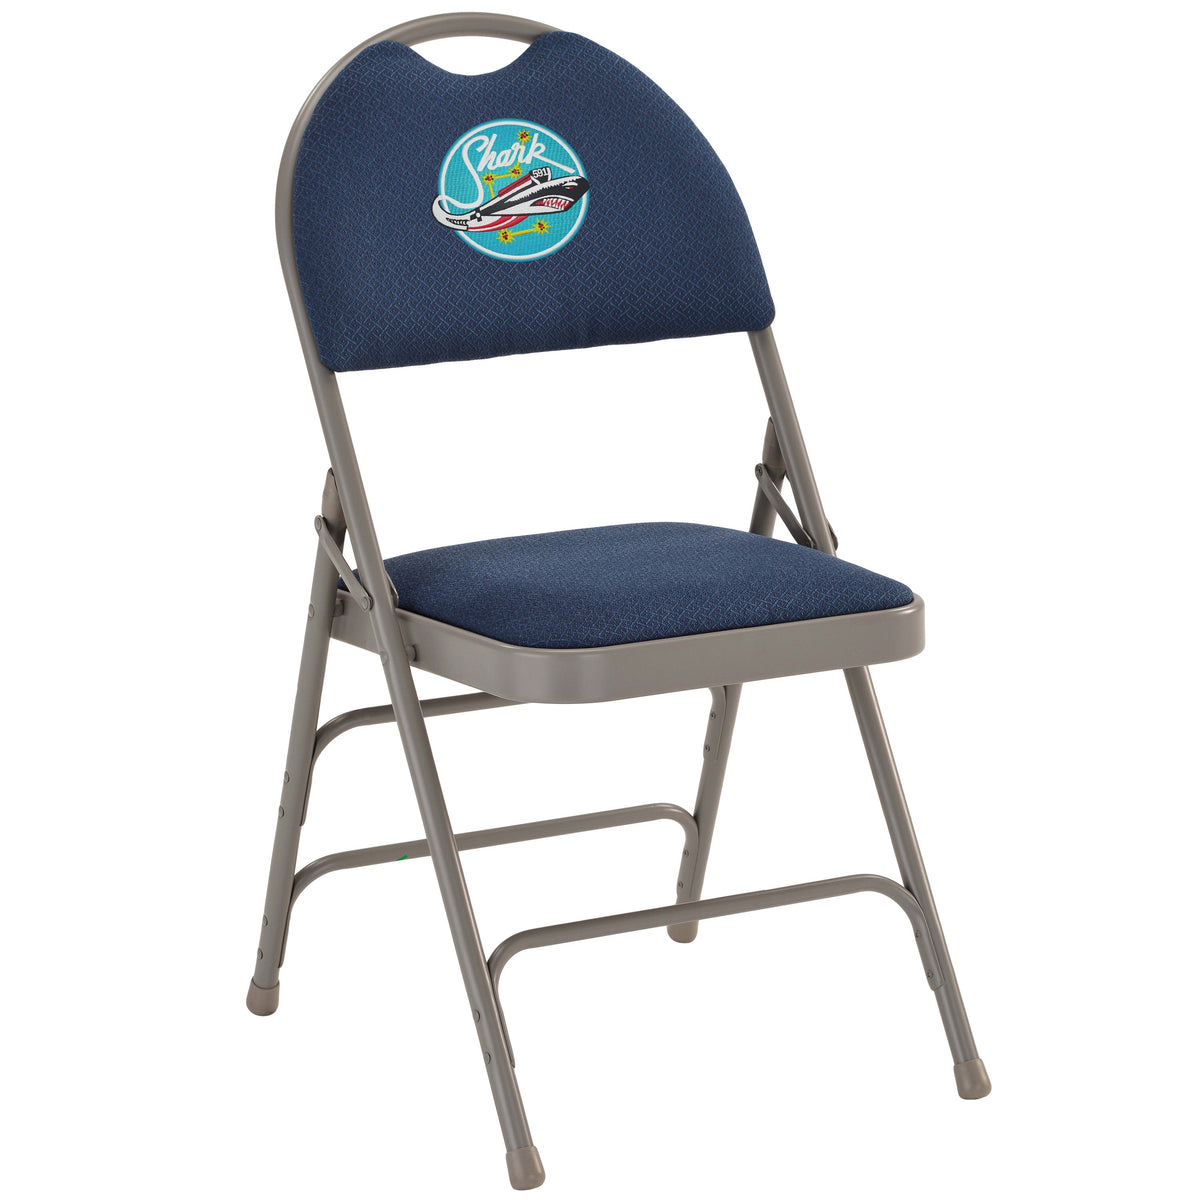 Navy Fabric/Gray Frame |#| EMB Ultra-Premium Triple Braced Navy Fabric Folding Chair with Carry Handle